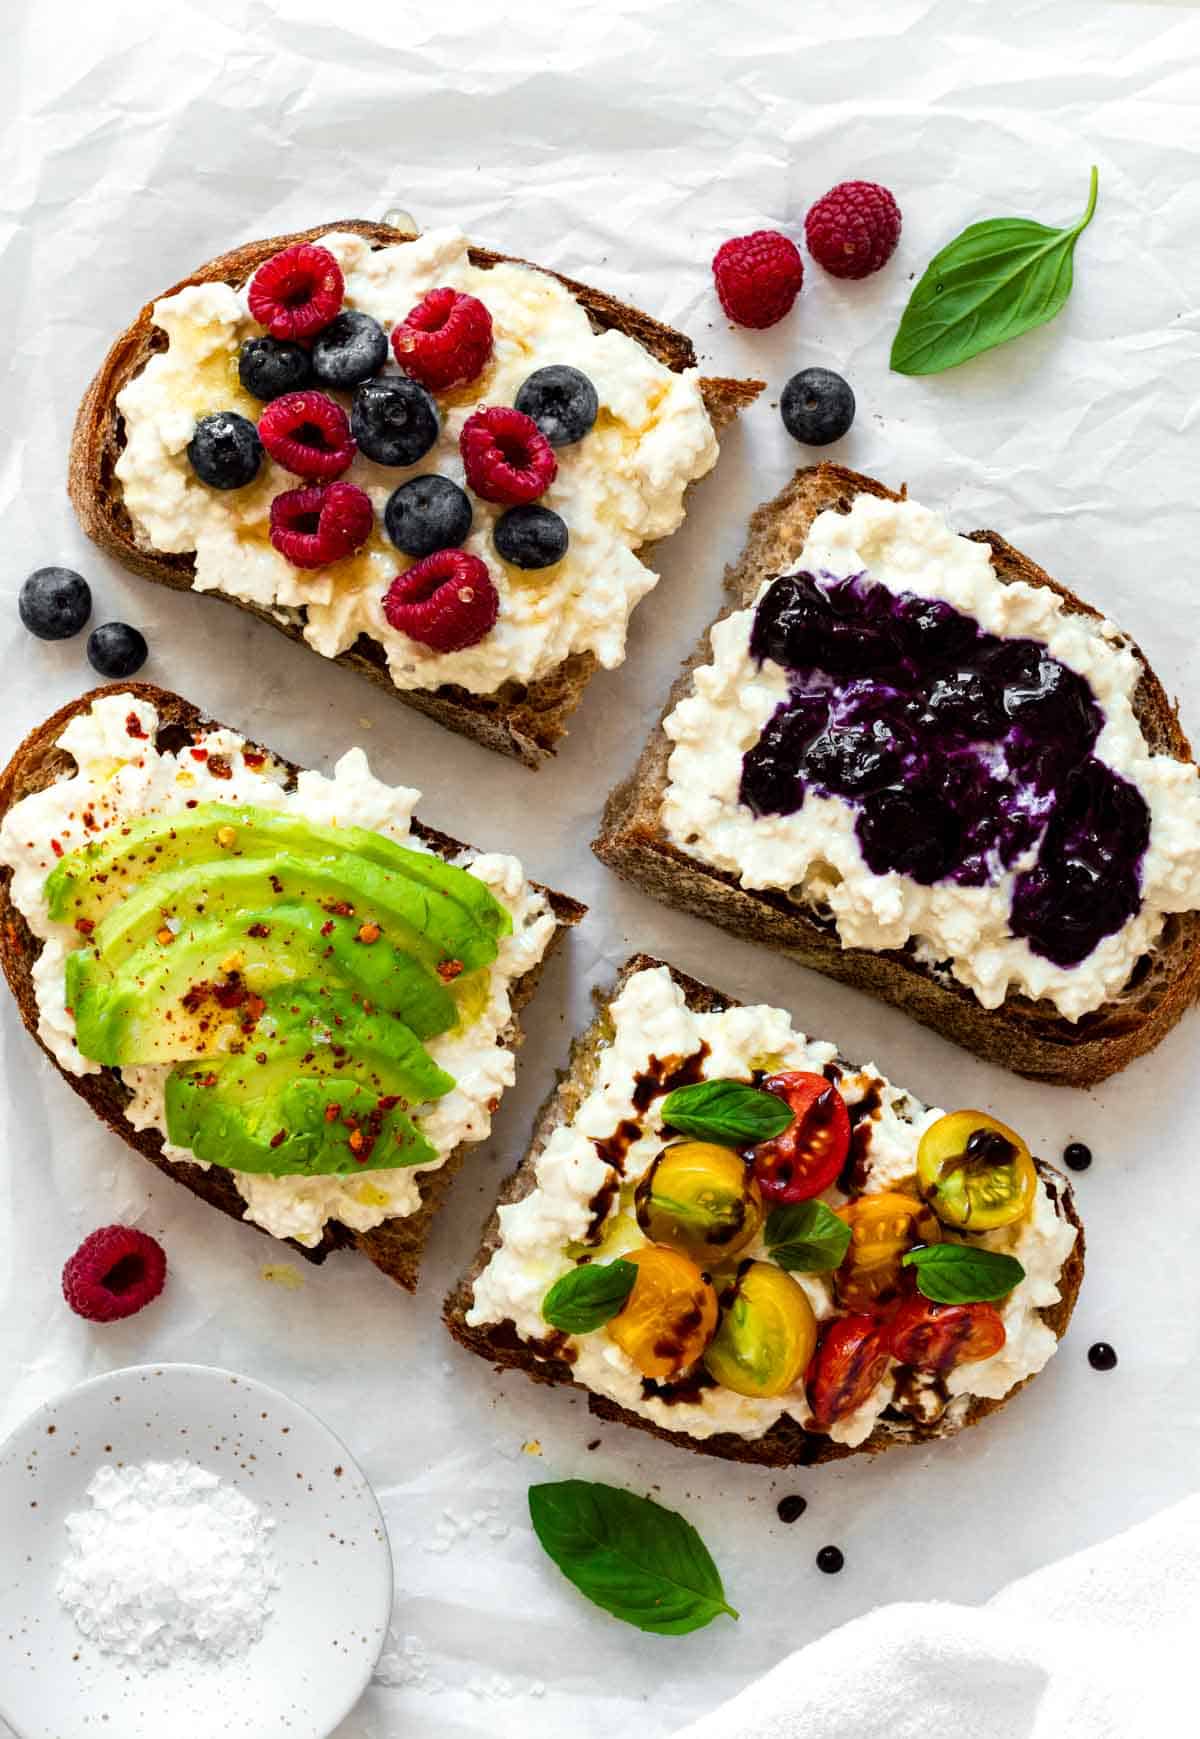 Four cottage cheese toasts with different toppings on them - two savory and two sweet.